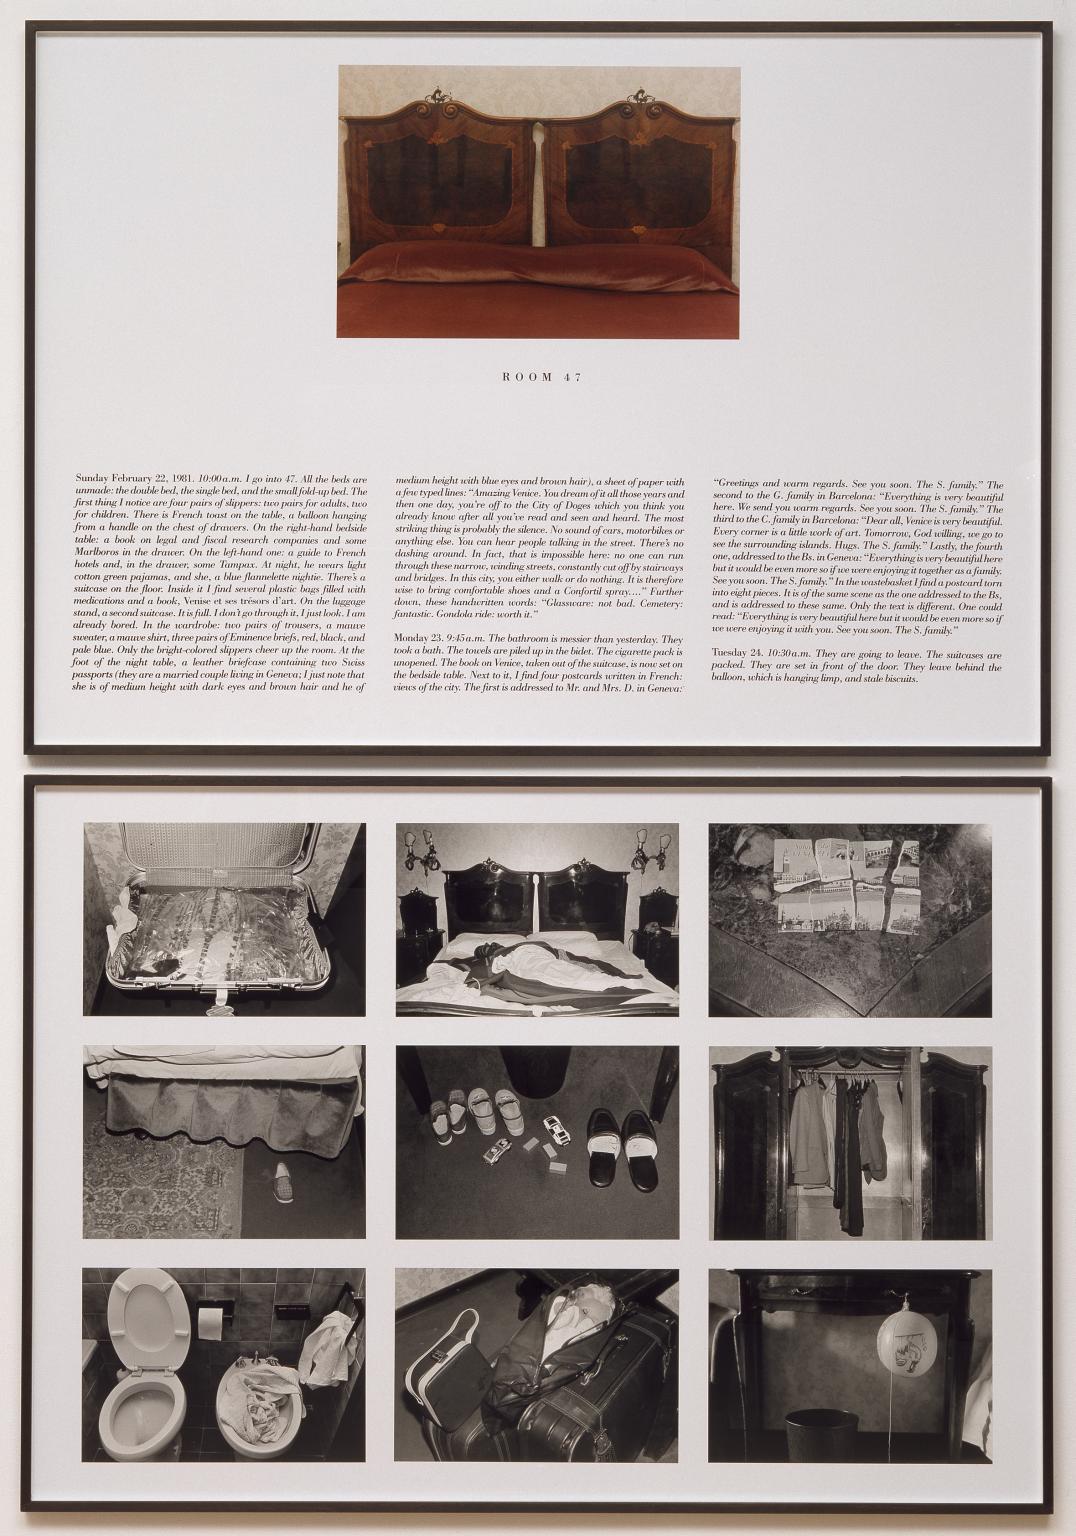 The Hotel, Room 47, Sophie Calle, 1981 Tate Adult Picture